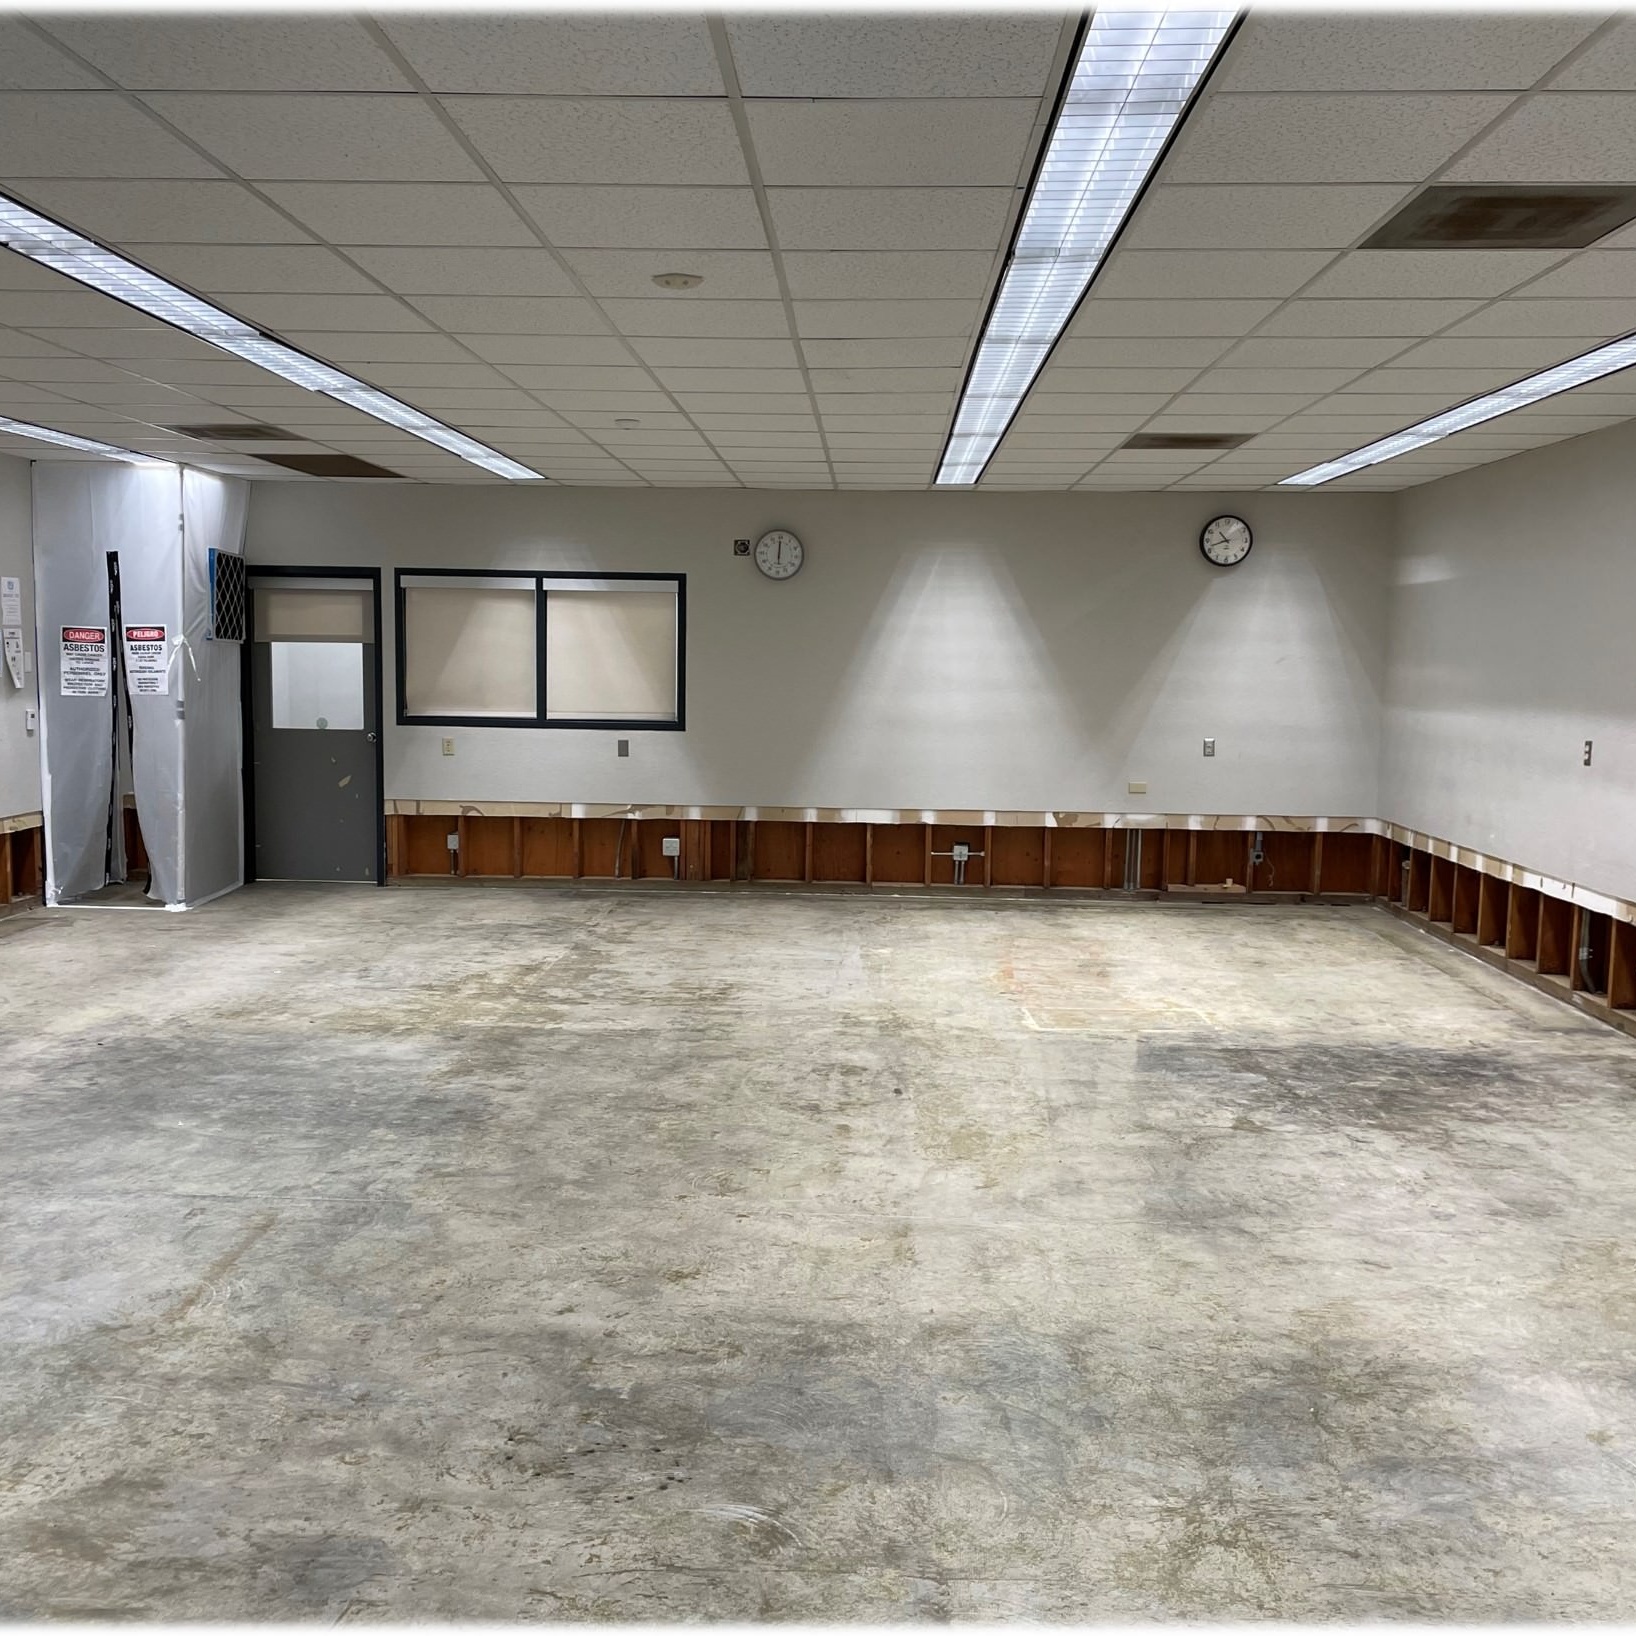 Reedley college lecture room before construction